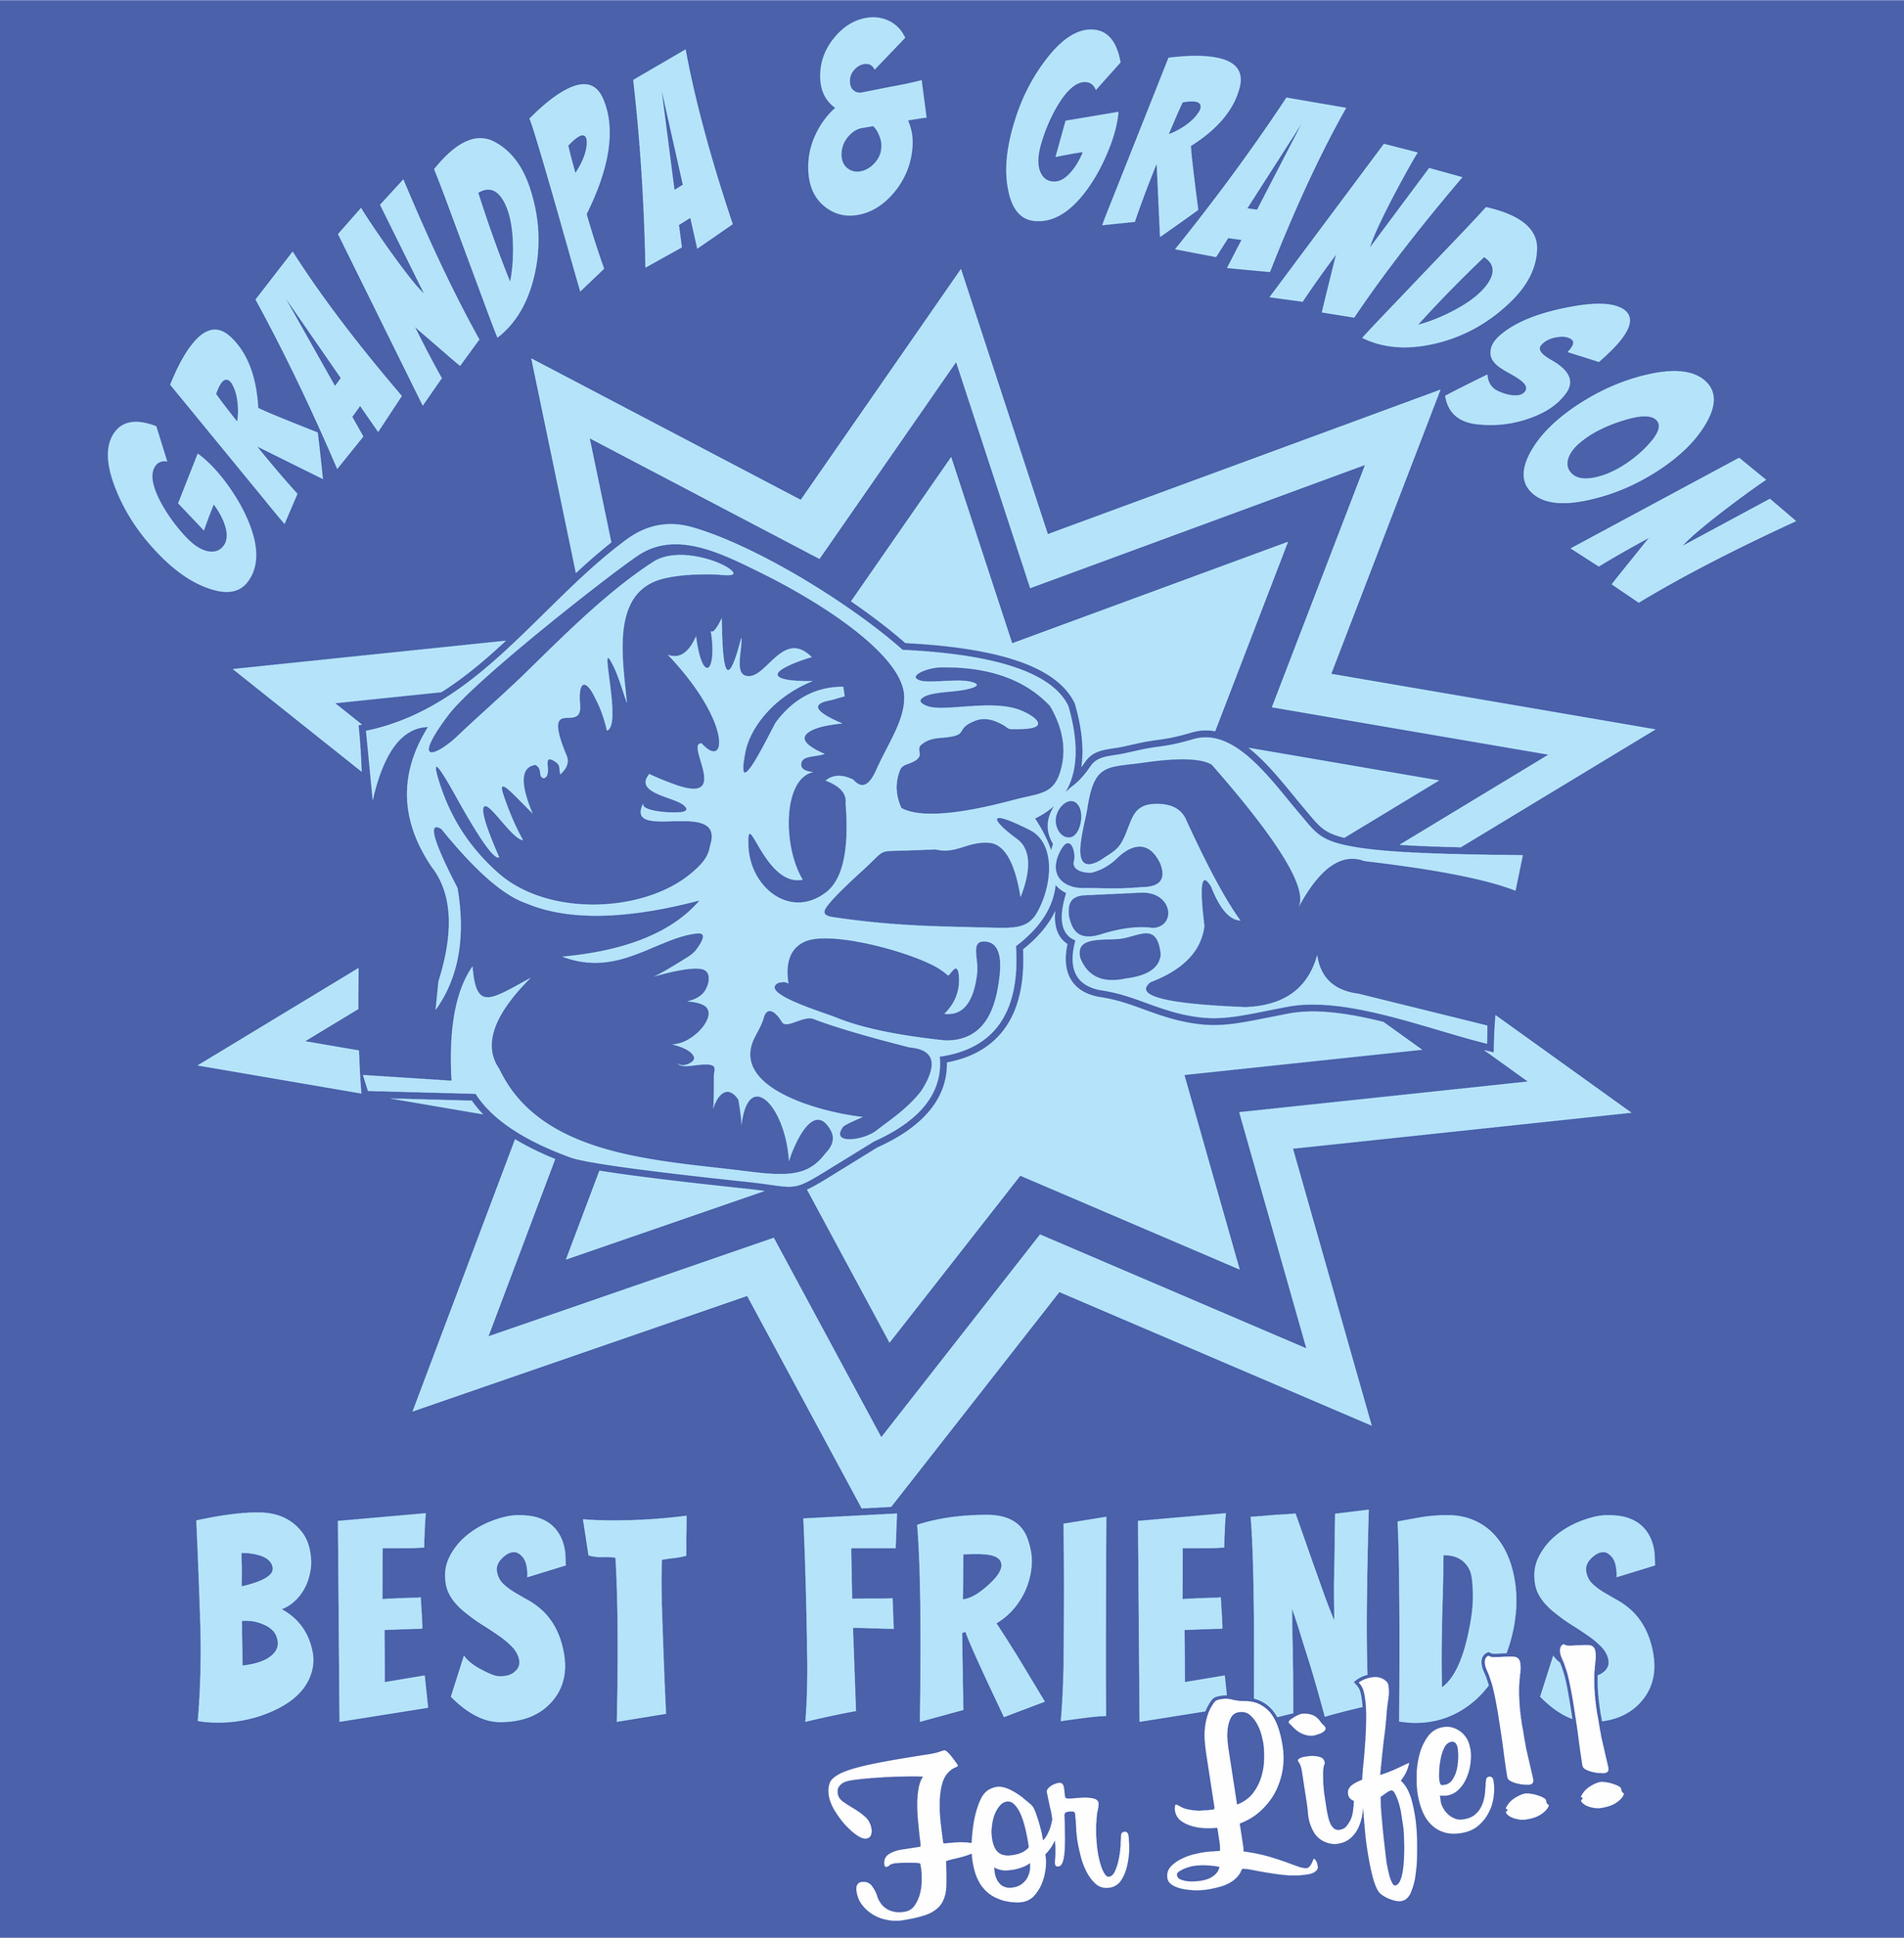 grandpa and grandson best friends for life fist pounding DTG design graphic